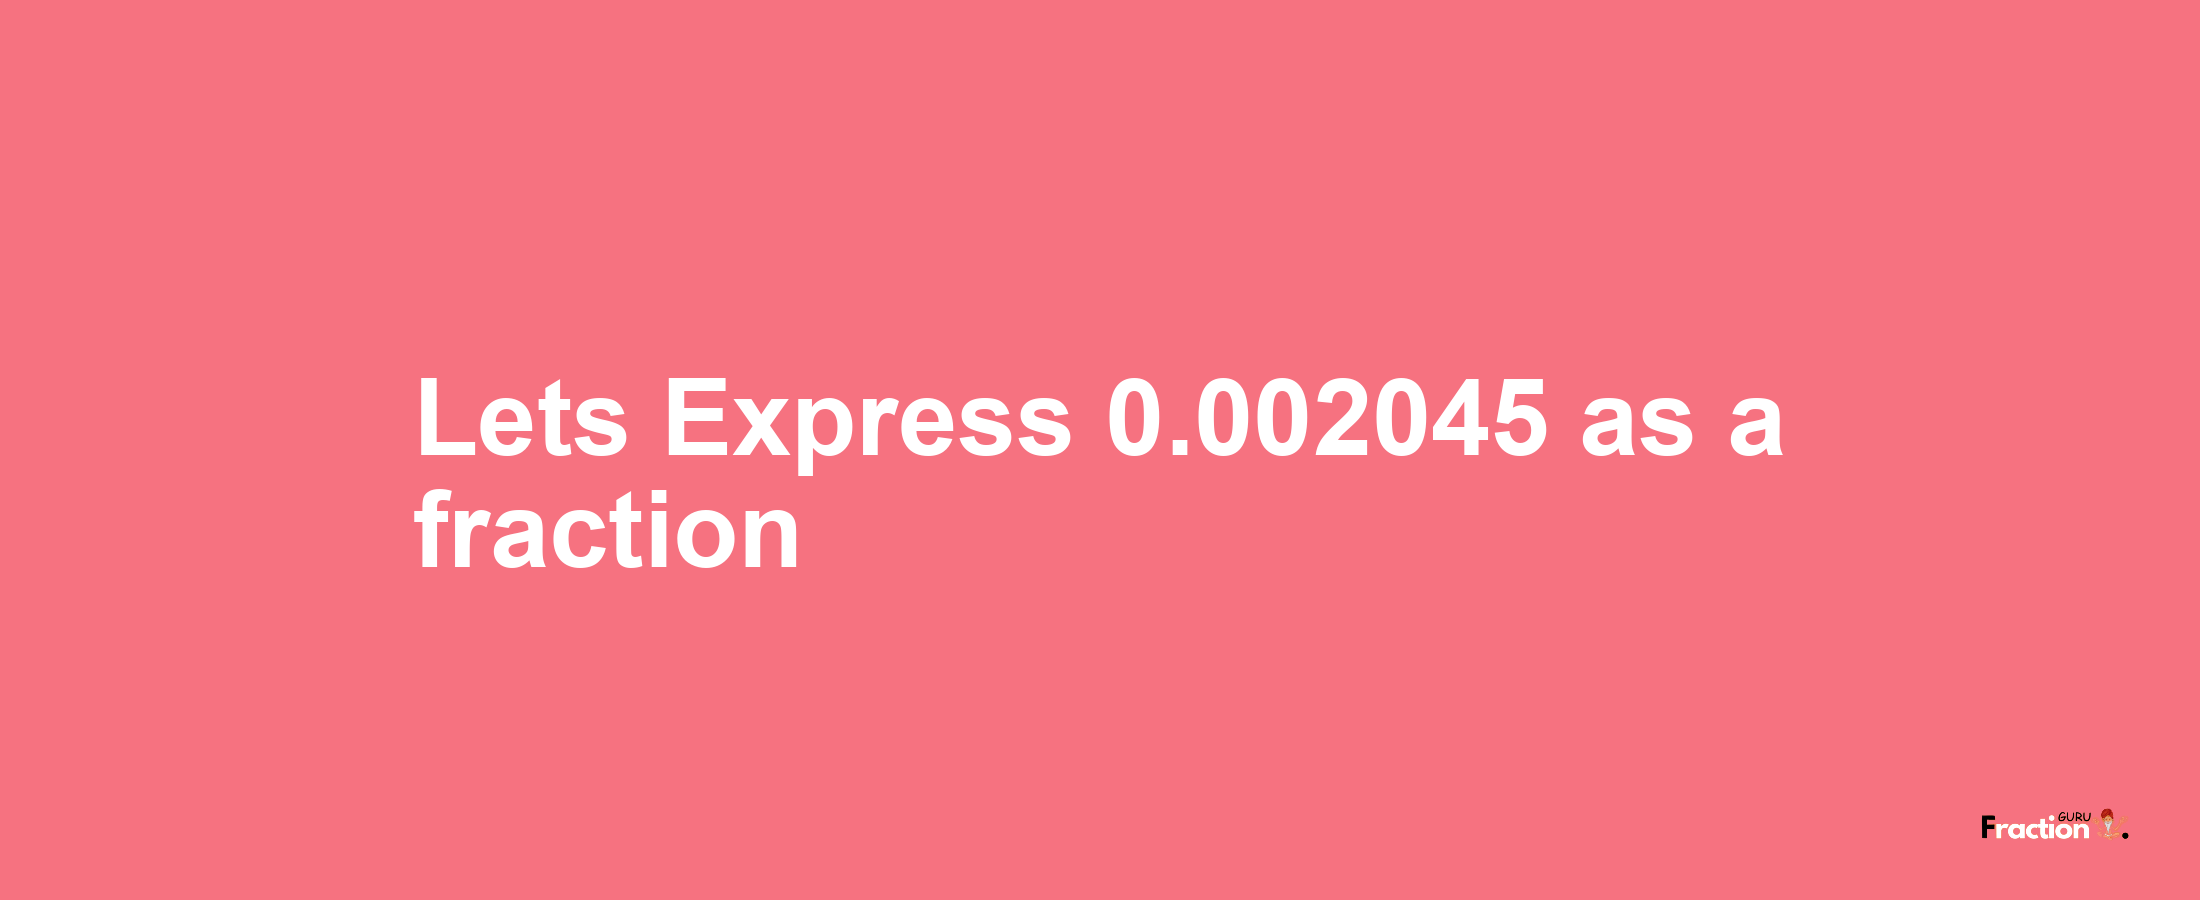 Lets Express 0.002045 as afraction